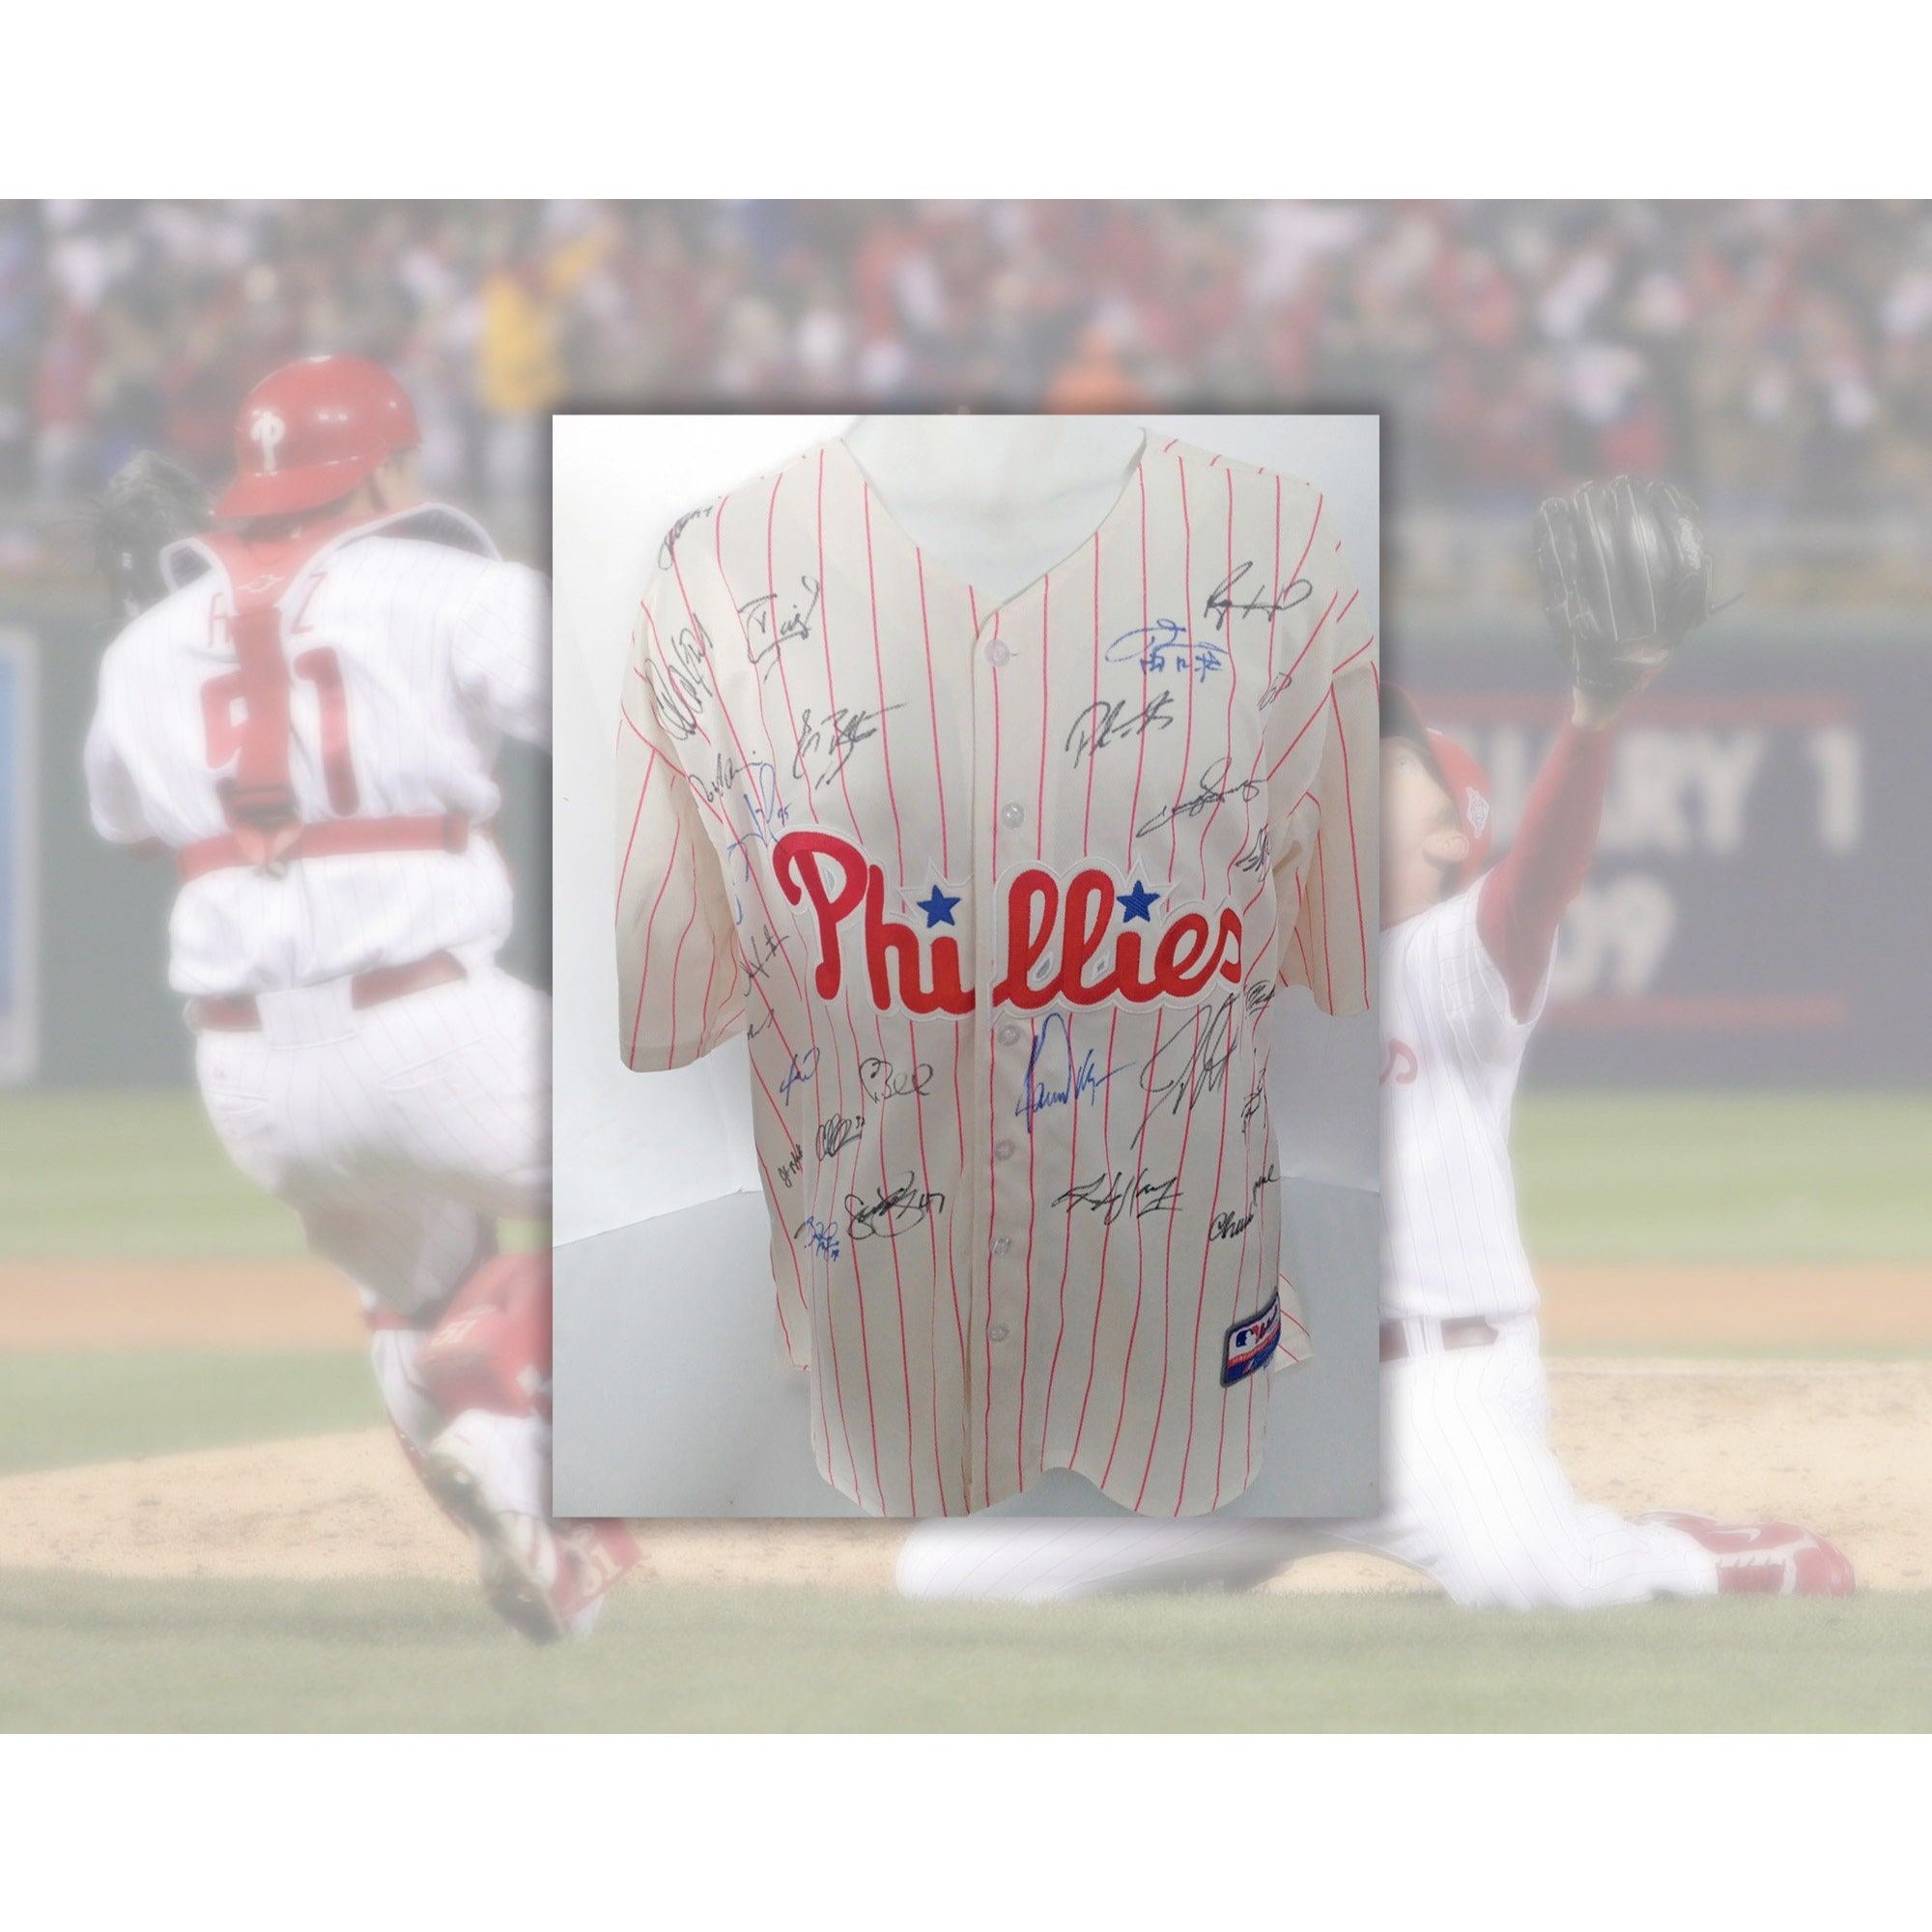 Jimmy Rollins Memorabilia, Autographed Jimmy Rollins Collectibles